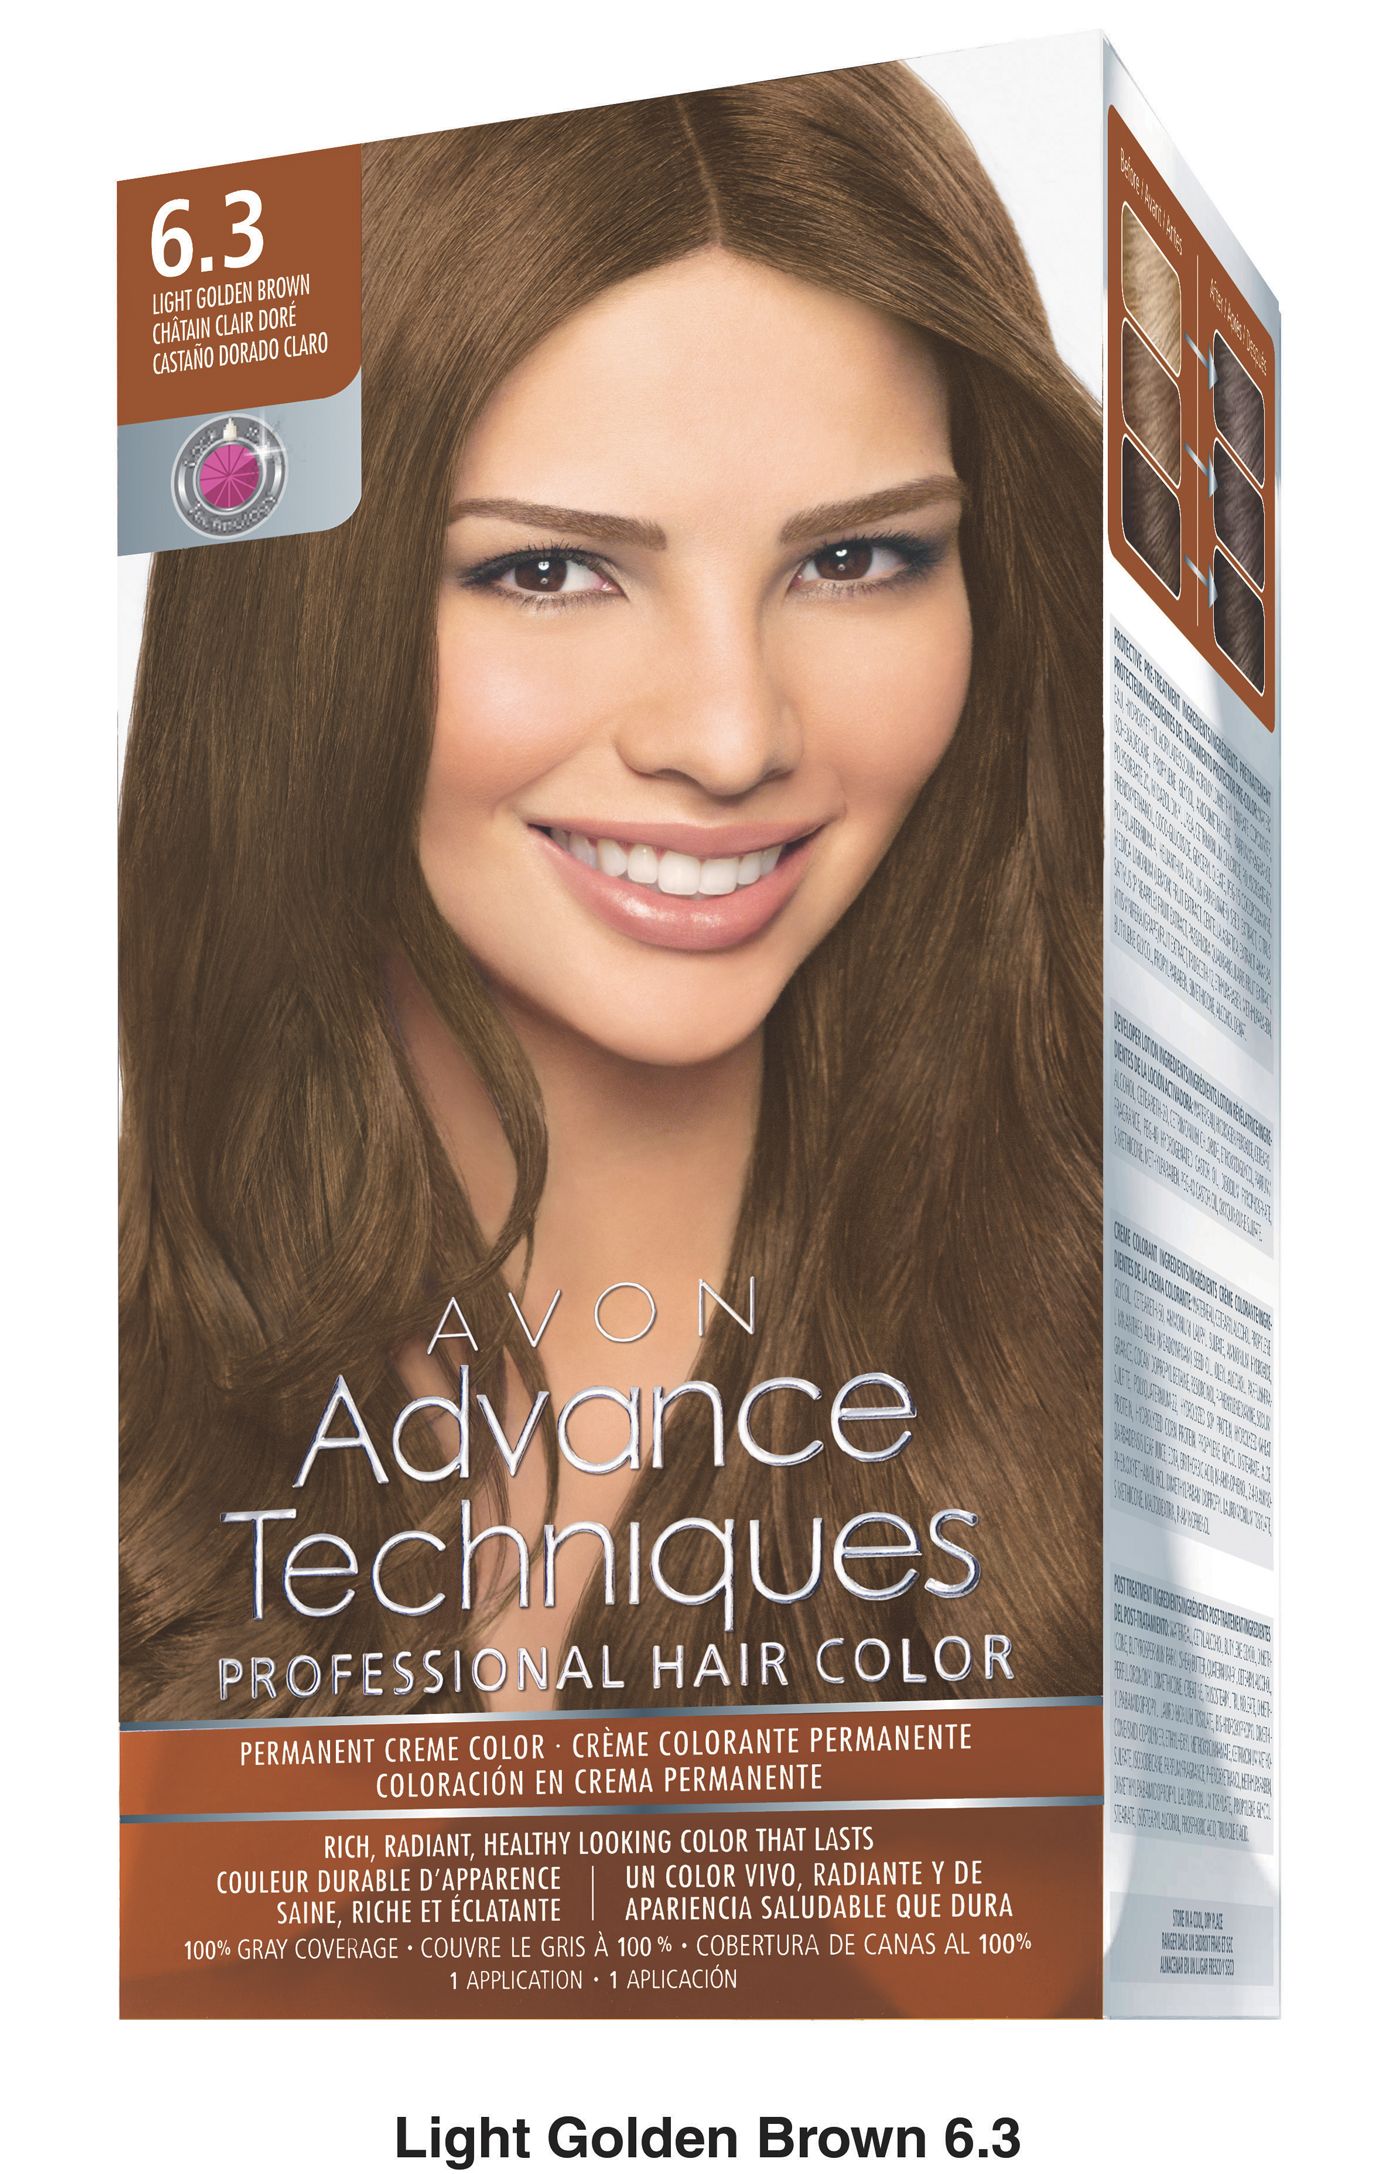 Avon Launches Hair Color in the U.S.